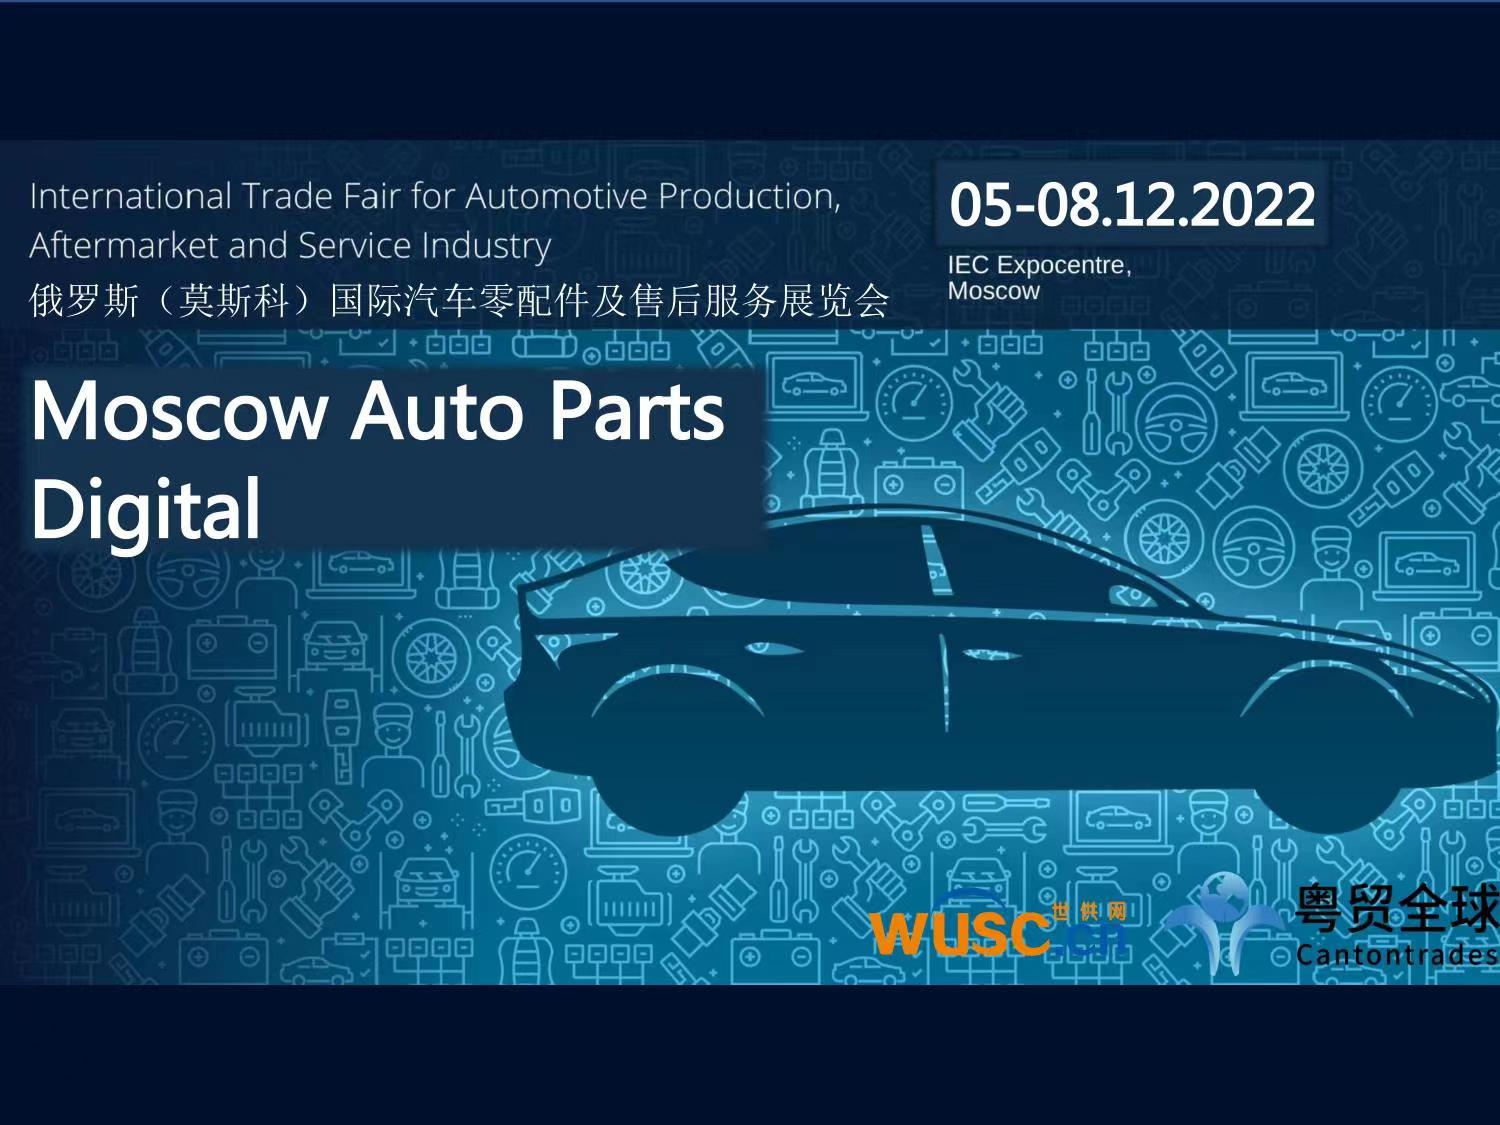 Moscow Auto Parts Digital